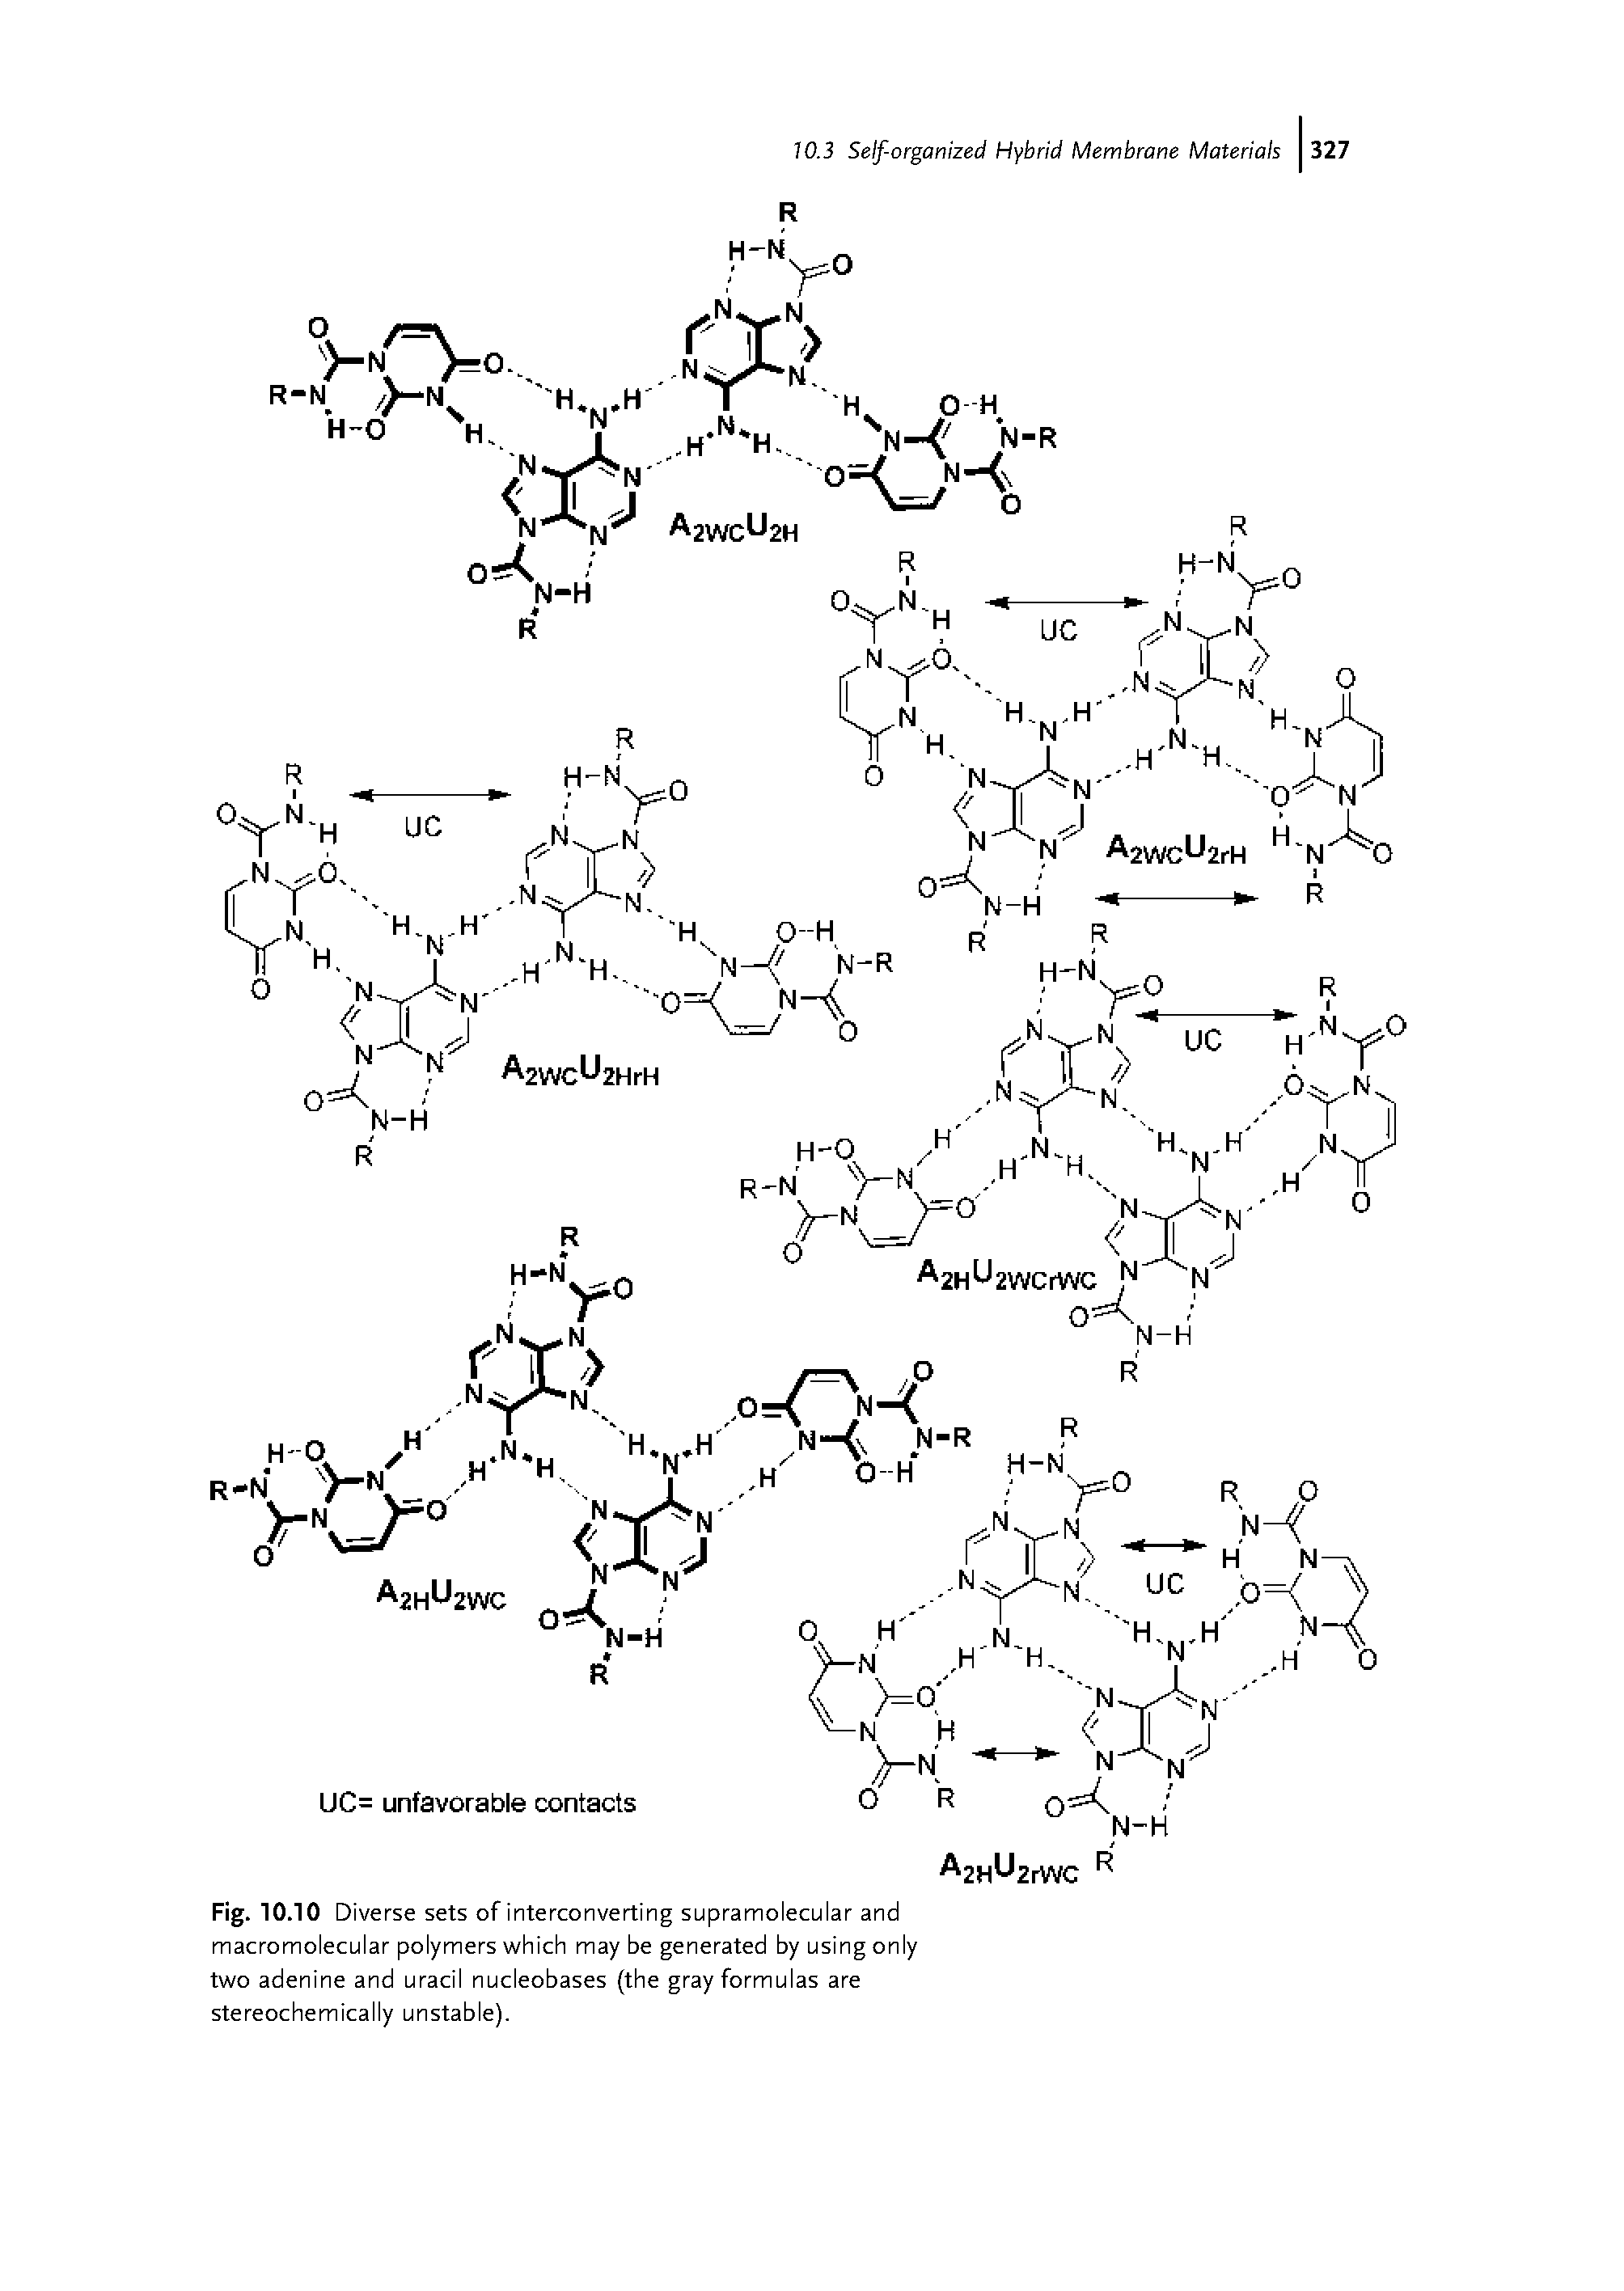 Fig. 10.10 Diverse sets of interconverting supramolecular and macromolecular polymers which may be generated by using only two adenine and uracil nucleobases (the gray formulas are stereochemically unstable).